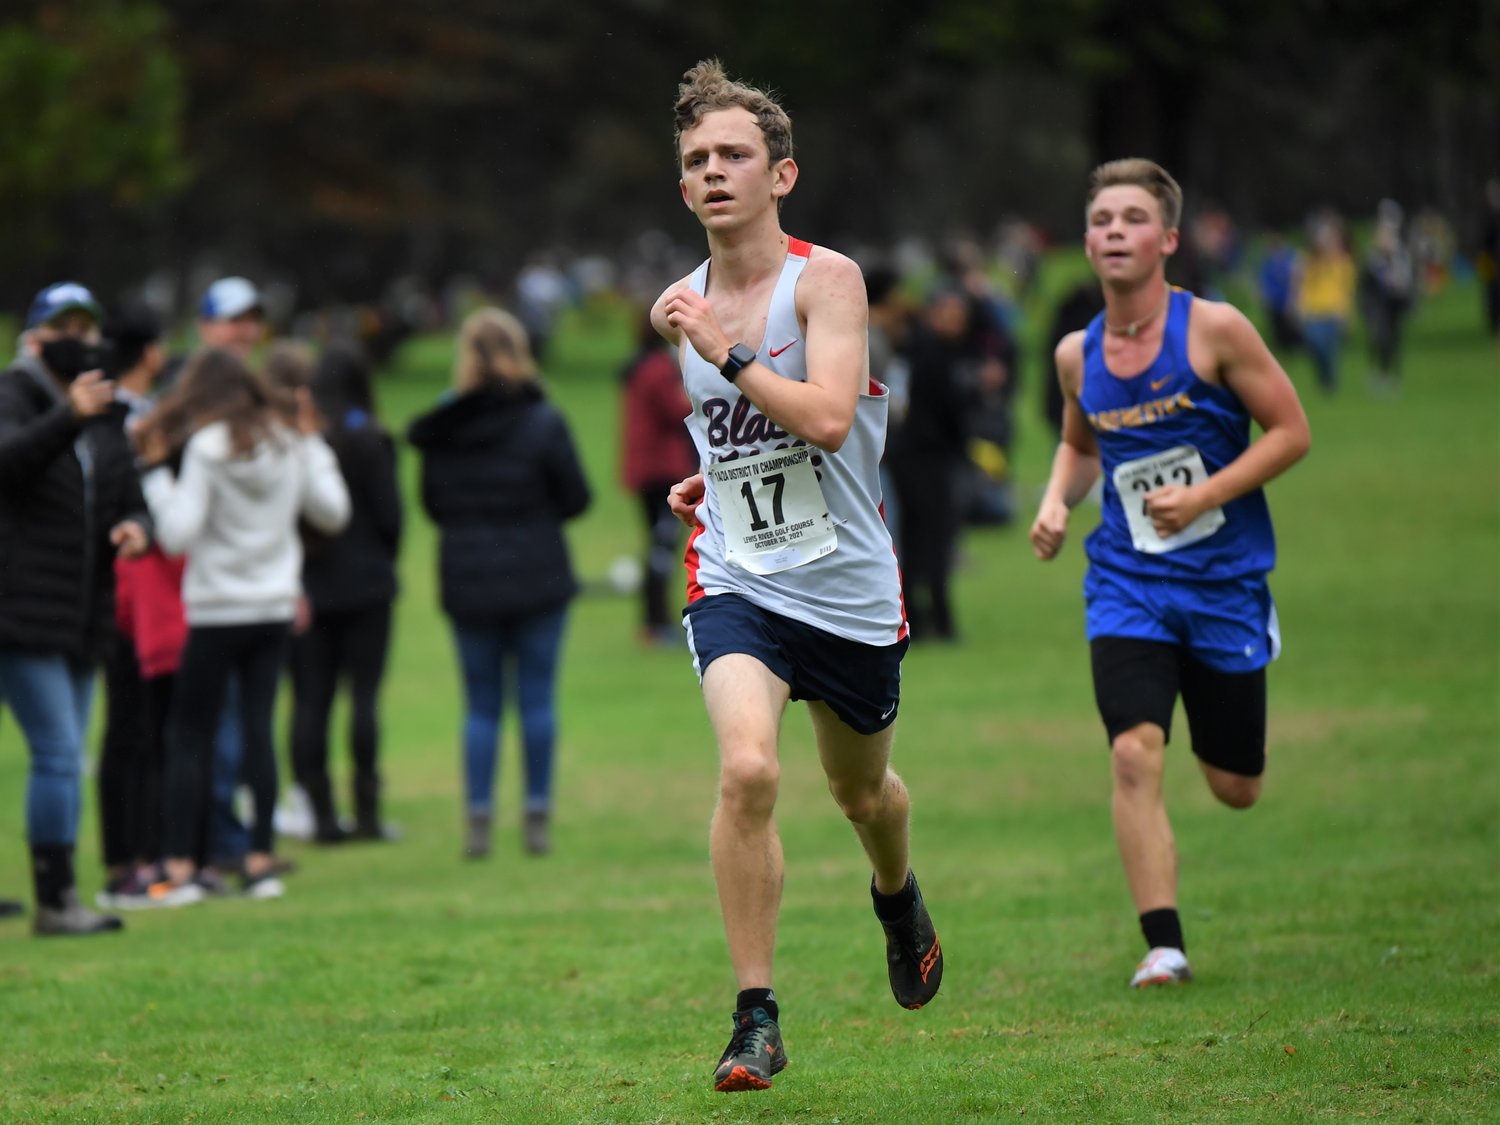 Black Hills senior Logan Carte races toward the finish line at the District 4 Cross Country Championships Oct. 28.